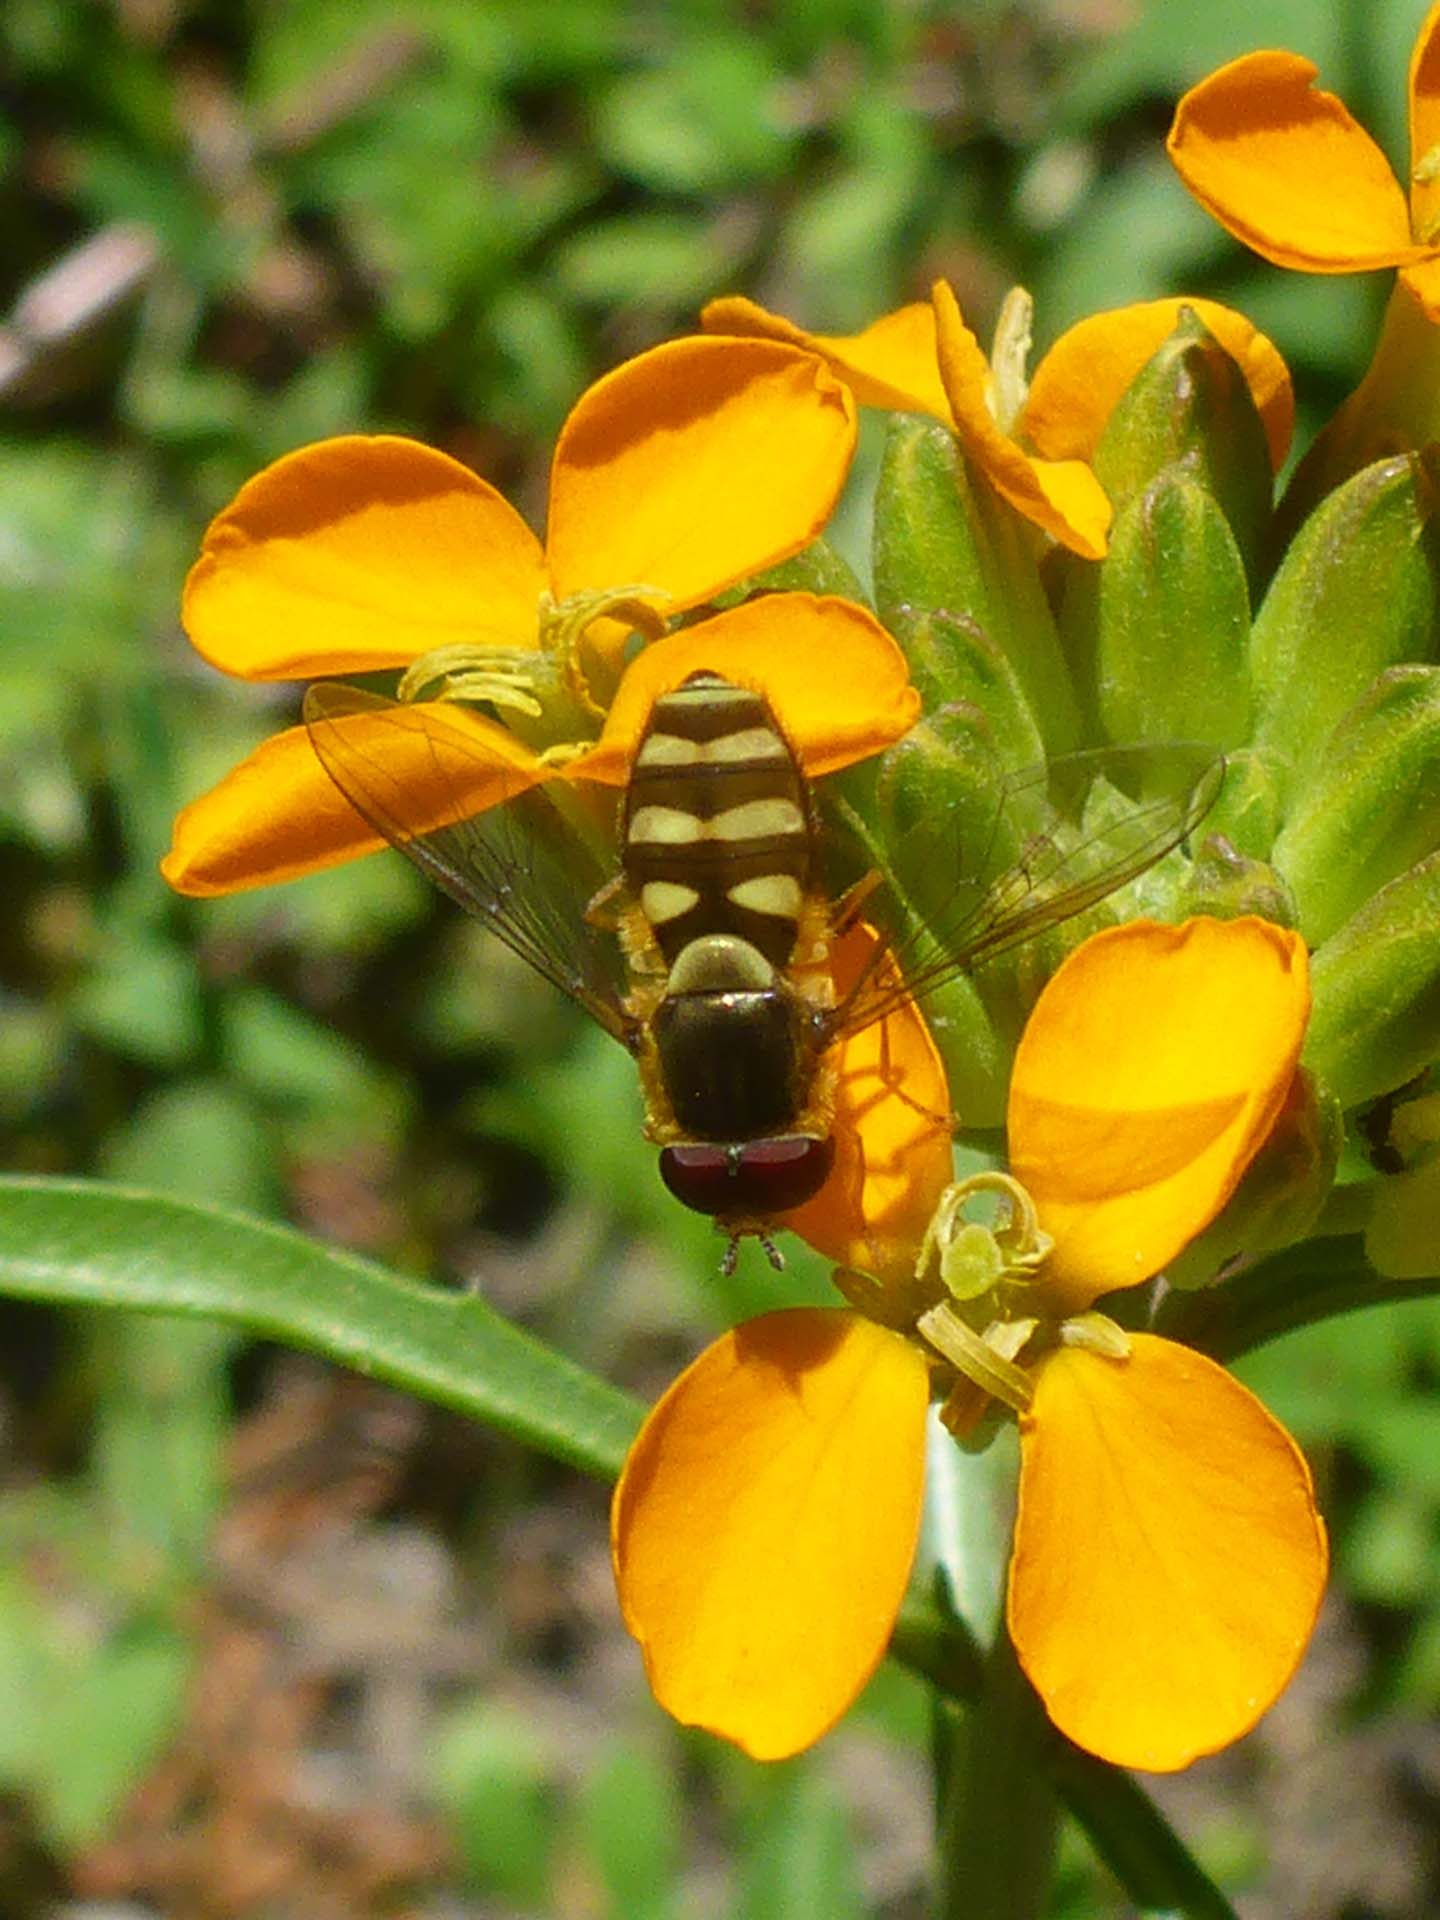 Western wallflower and syrphid fly. D. Burk.